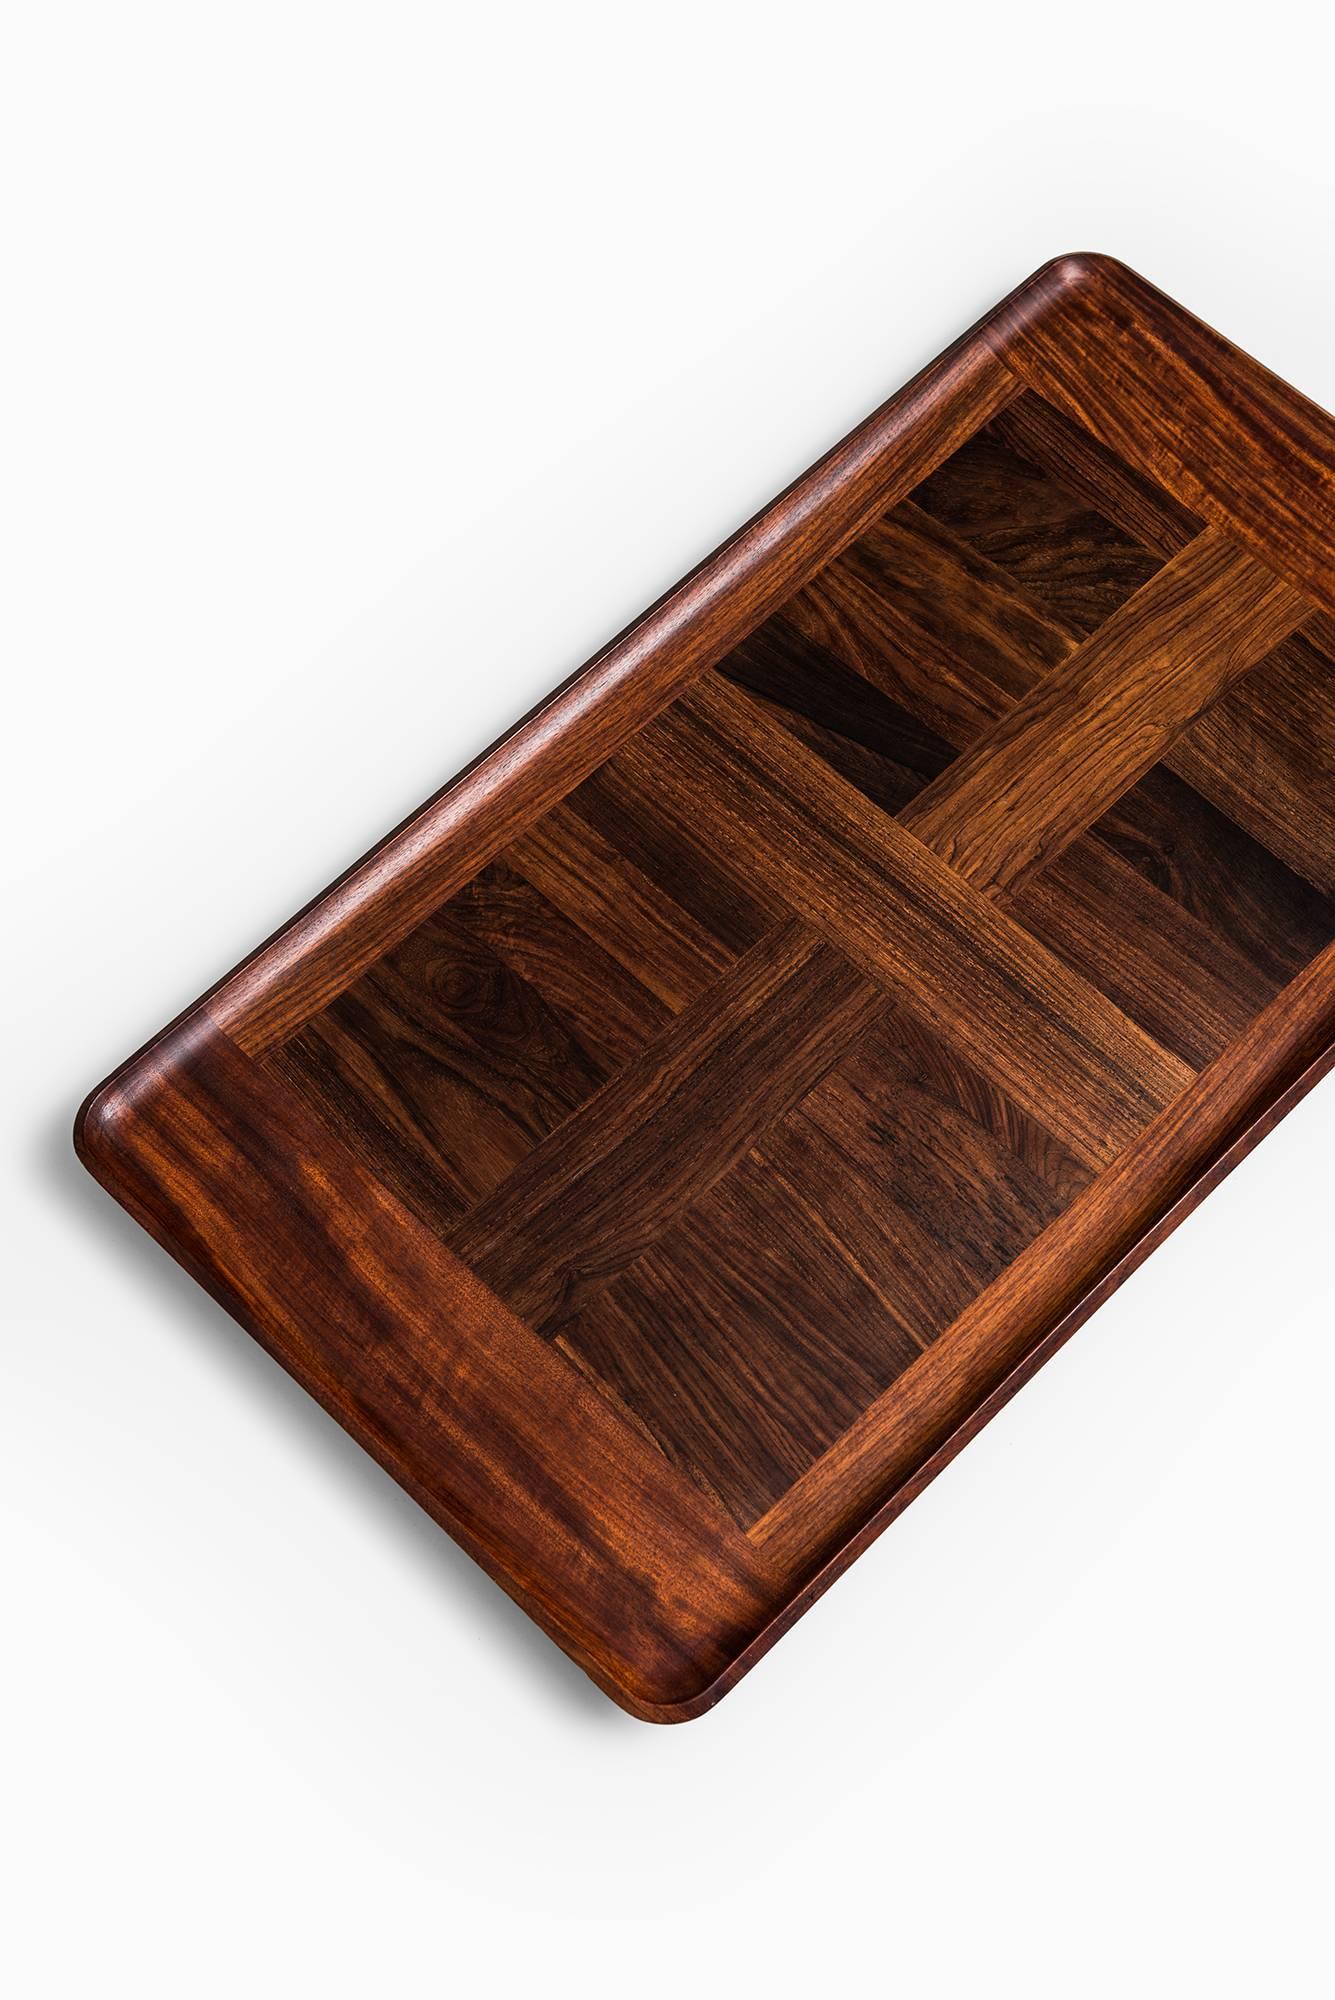 Rare large tray in cocobolo designed by Jens Quistgaard. Produced by Dansk in Denmark.